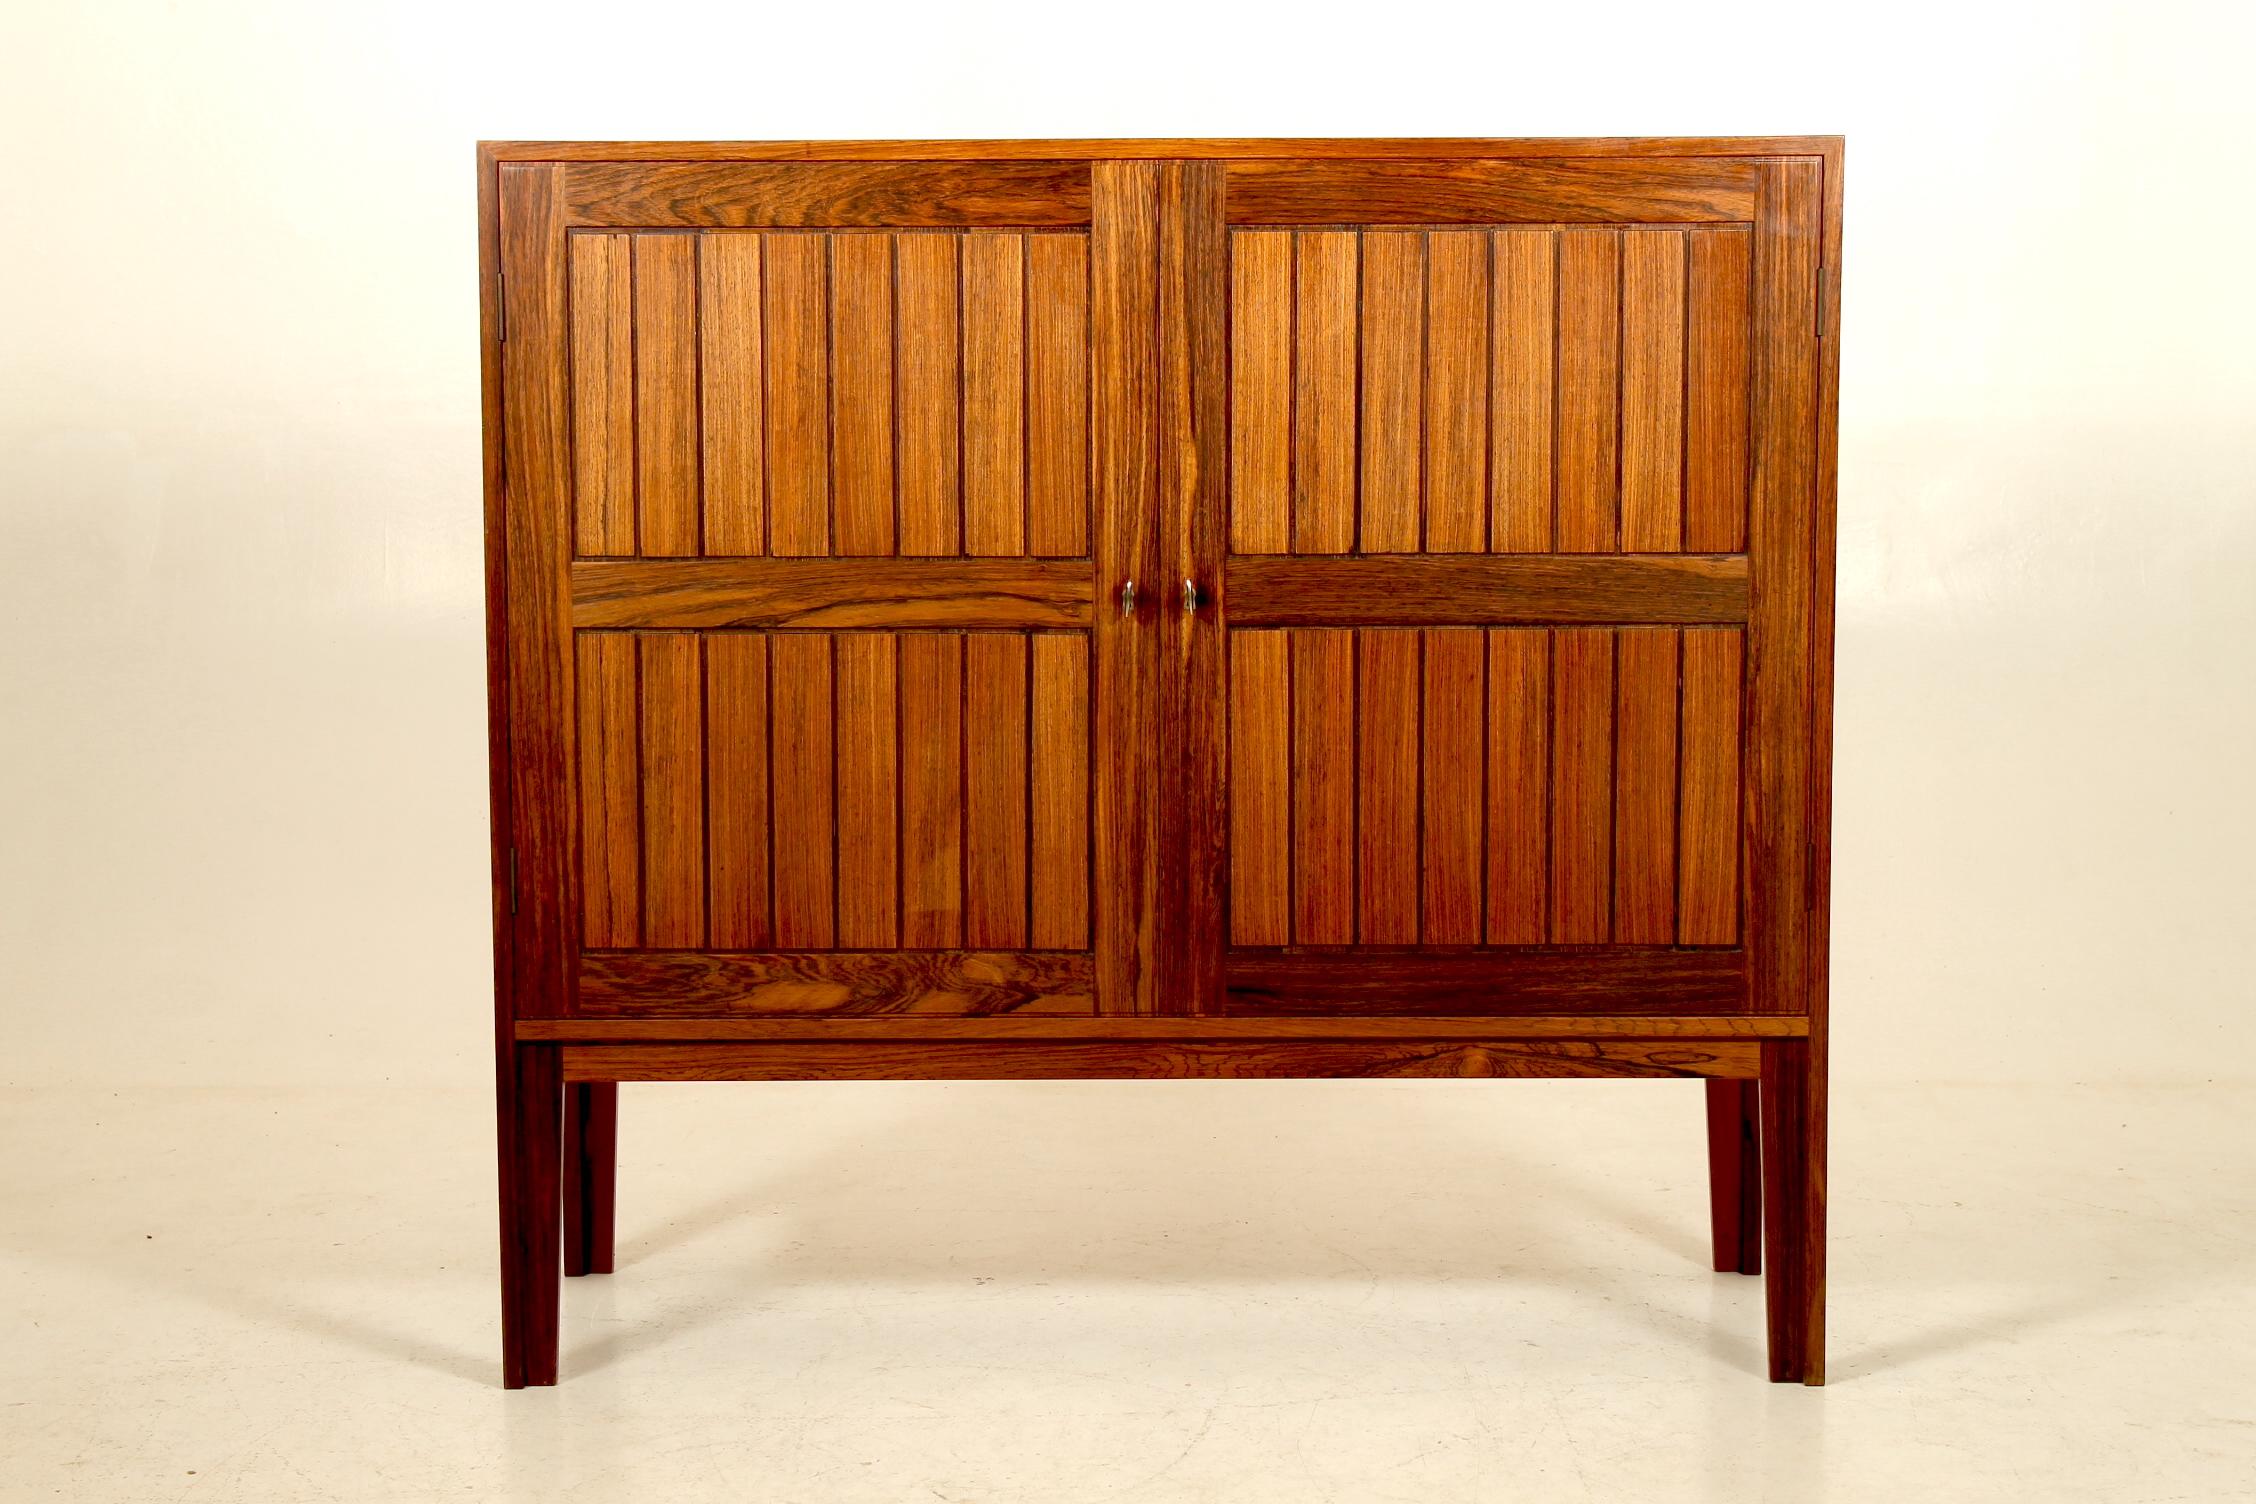 Cabinet with two doors, adjustable shelves and solid rosewood drawers inside. Designed by Kurt Østervig in the 1960s and manufactured by VAMO Sønderborg, Denmark. Original receipt from 1964 inside.
	
